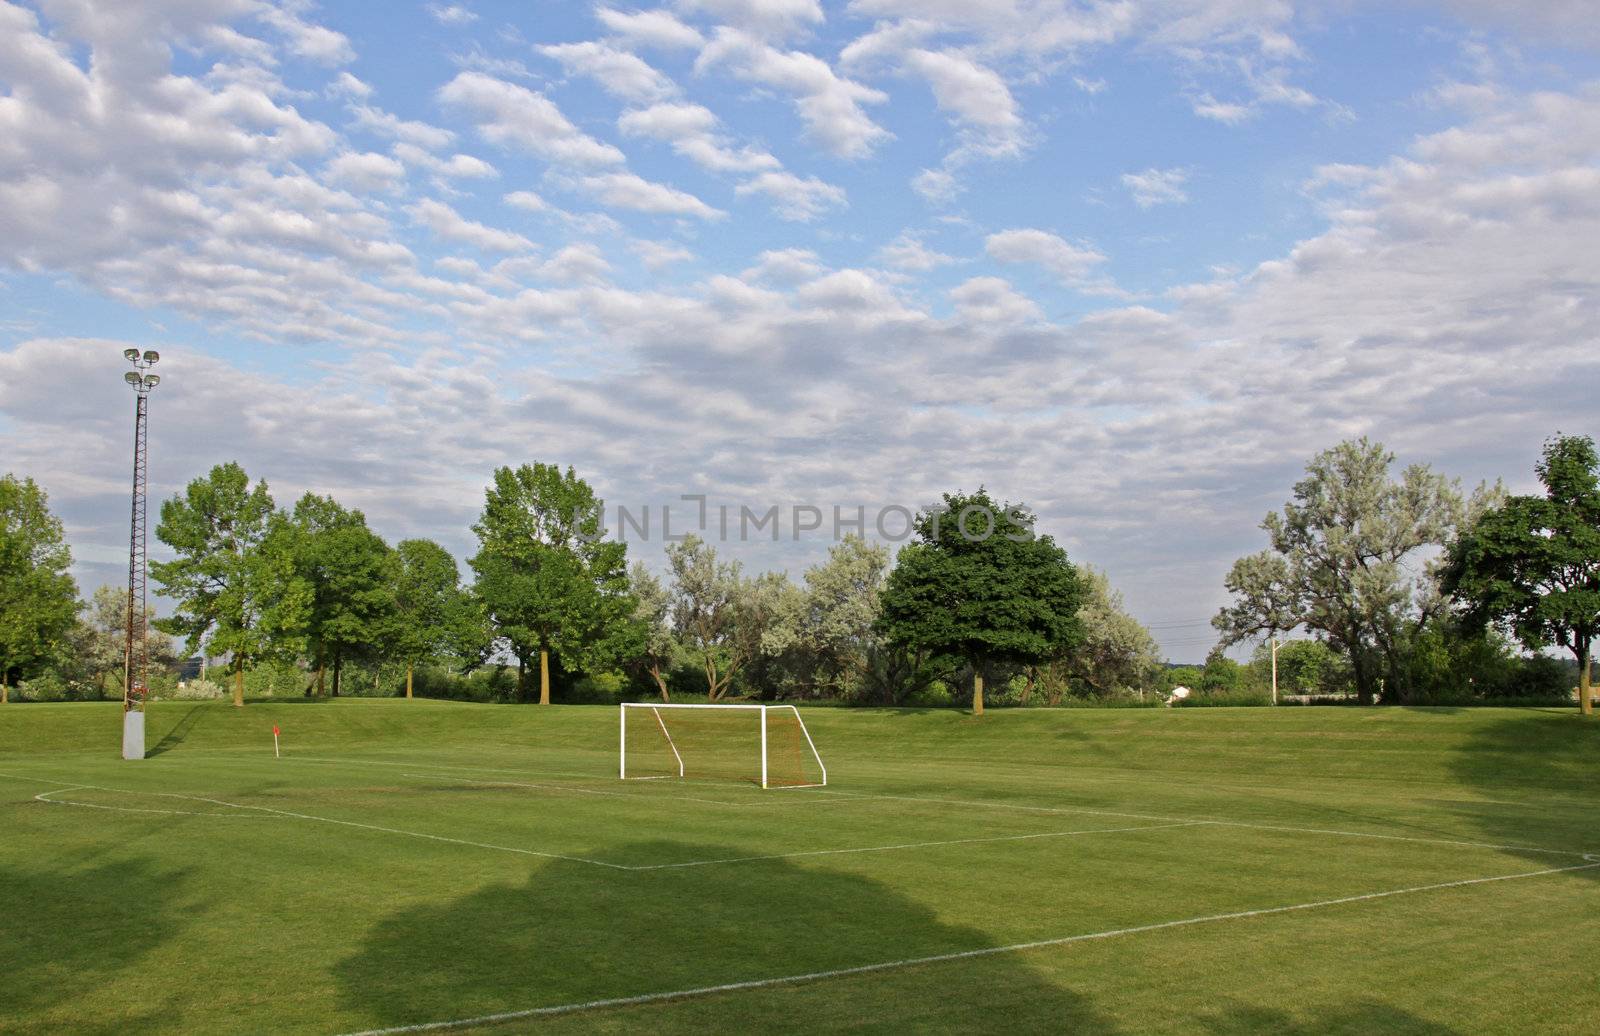 Soccer Field and Sky
 by ca2hill